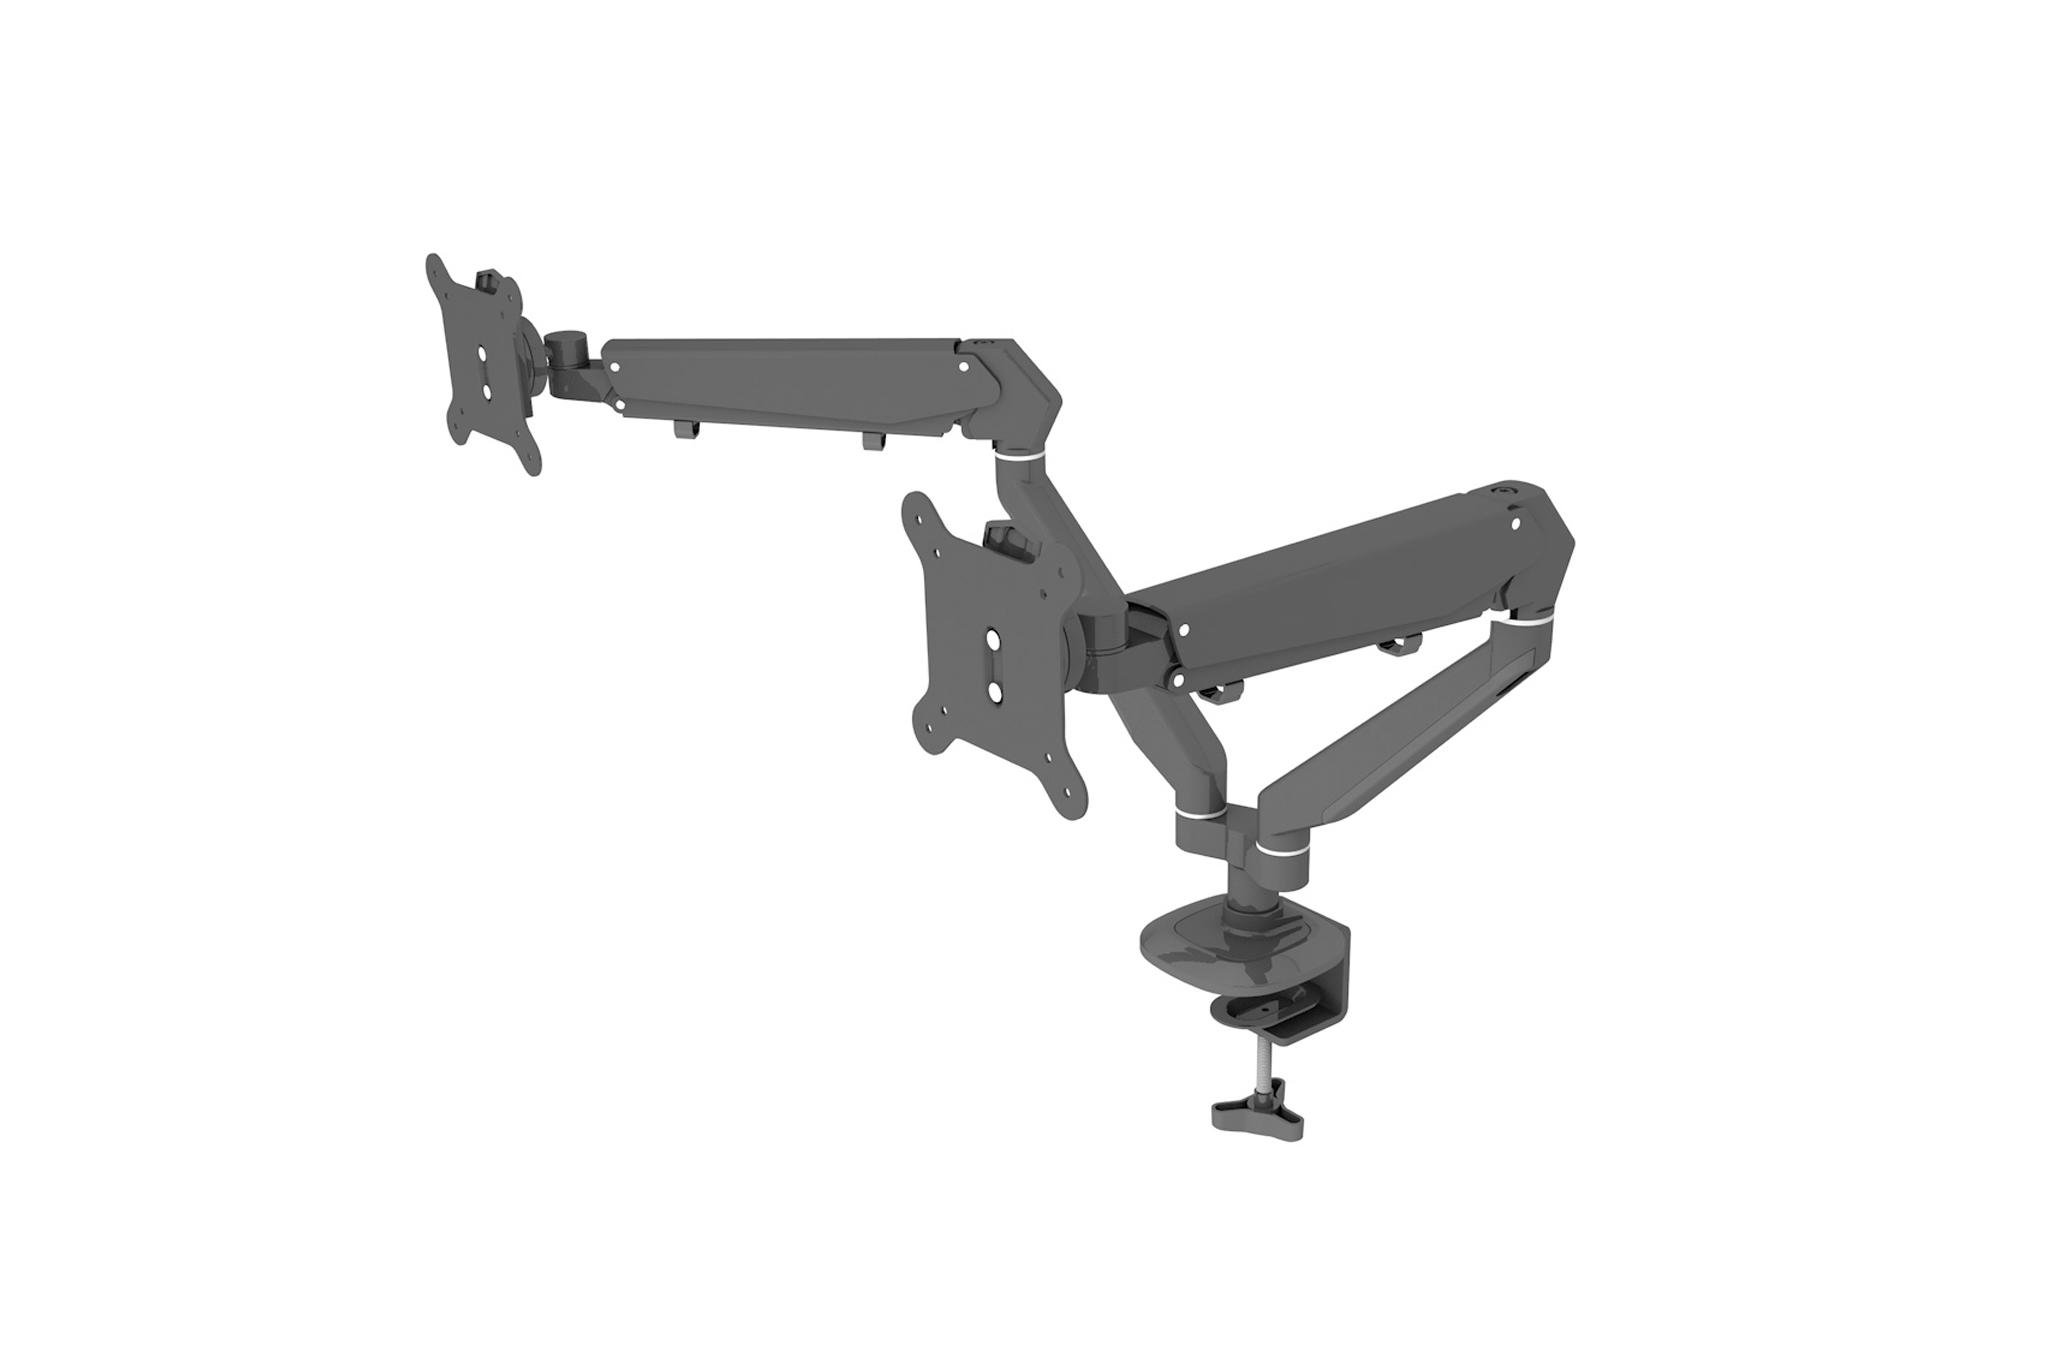 Monitor gas arm with desk mount